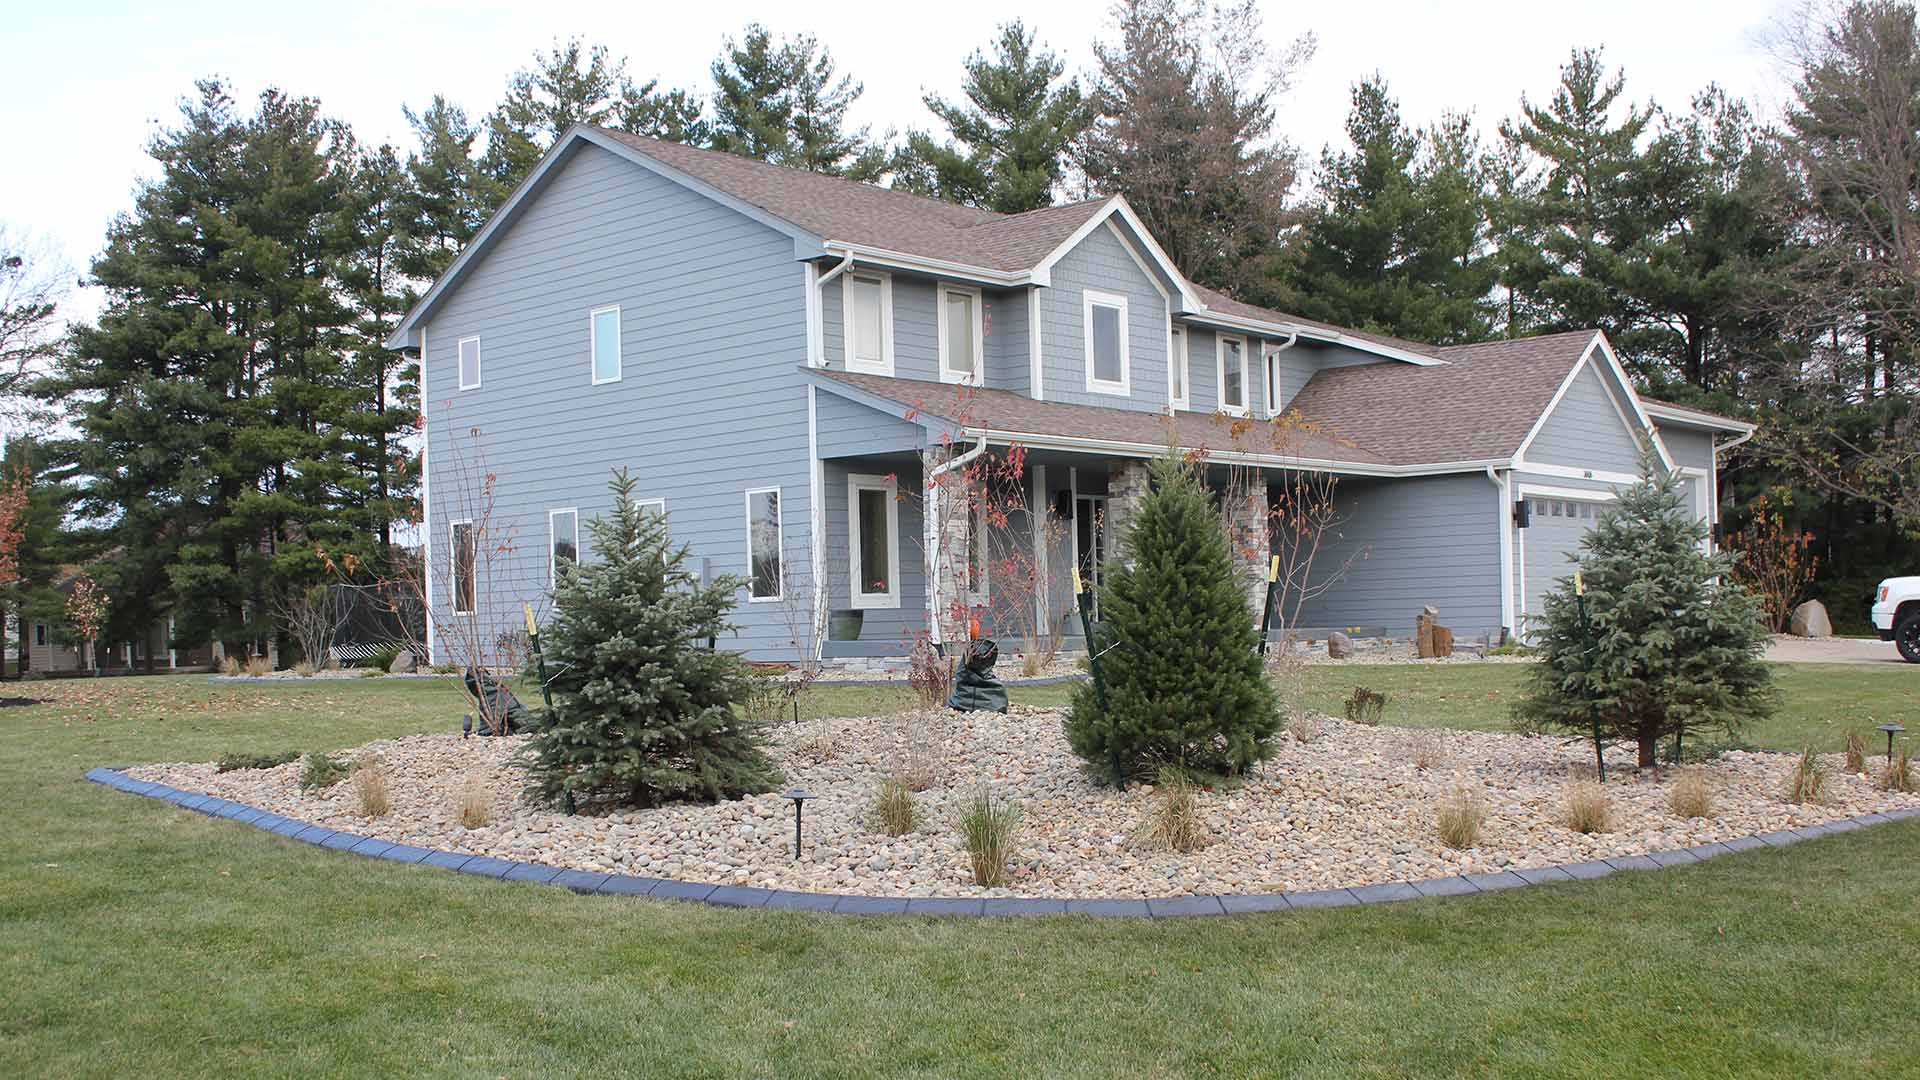 Large home with a landscape bed with concrete edging added in Waukee, IA.